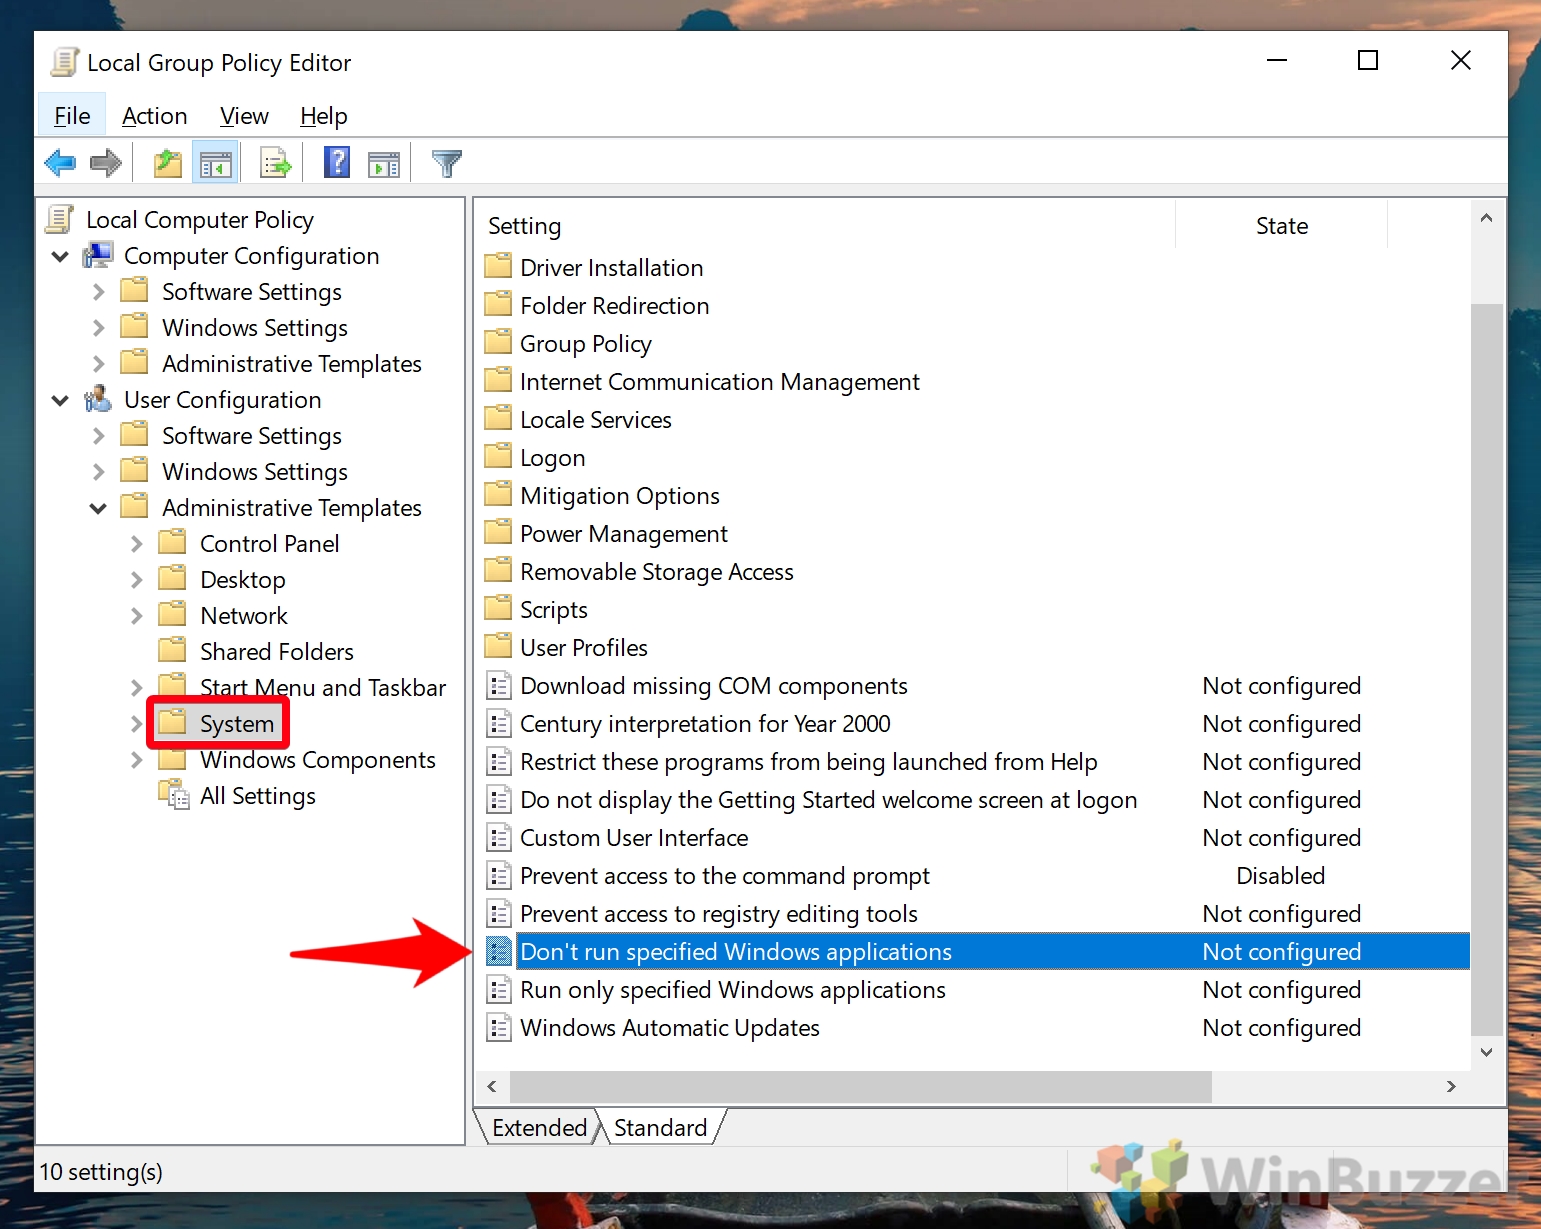 How to Disable PowerShell in Windows 10 - 30